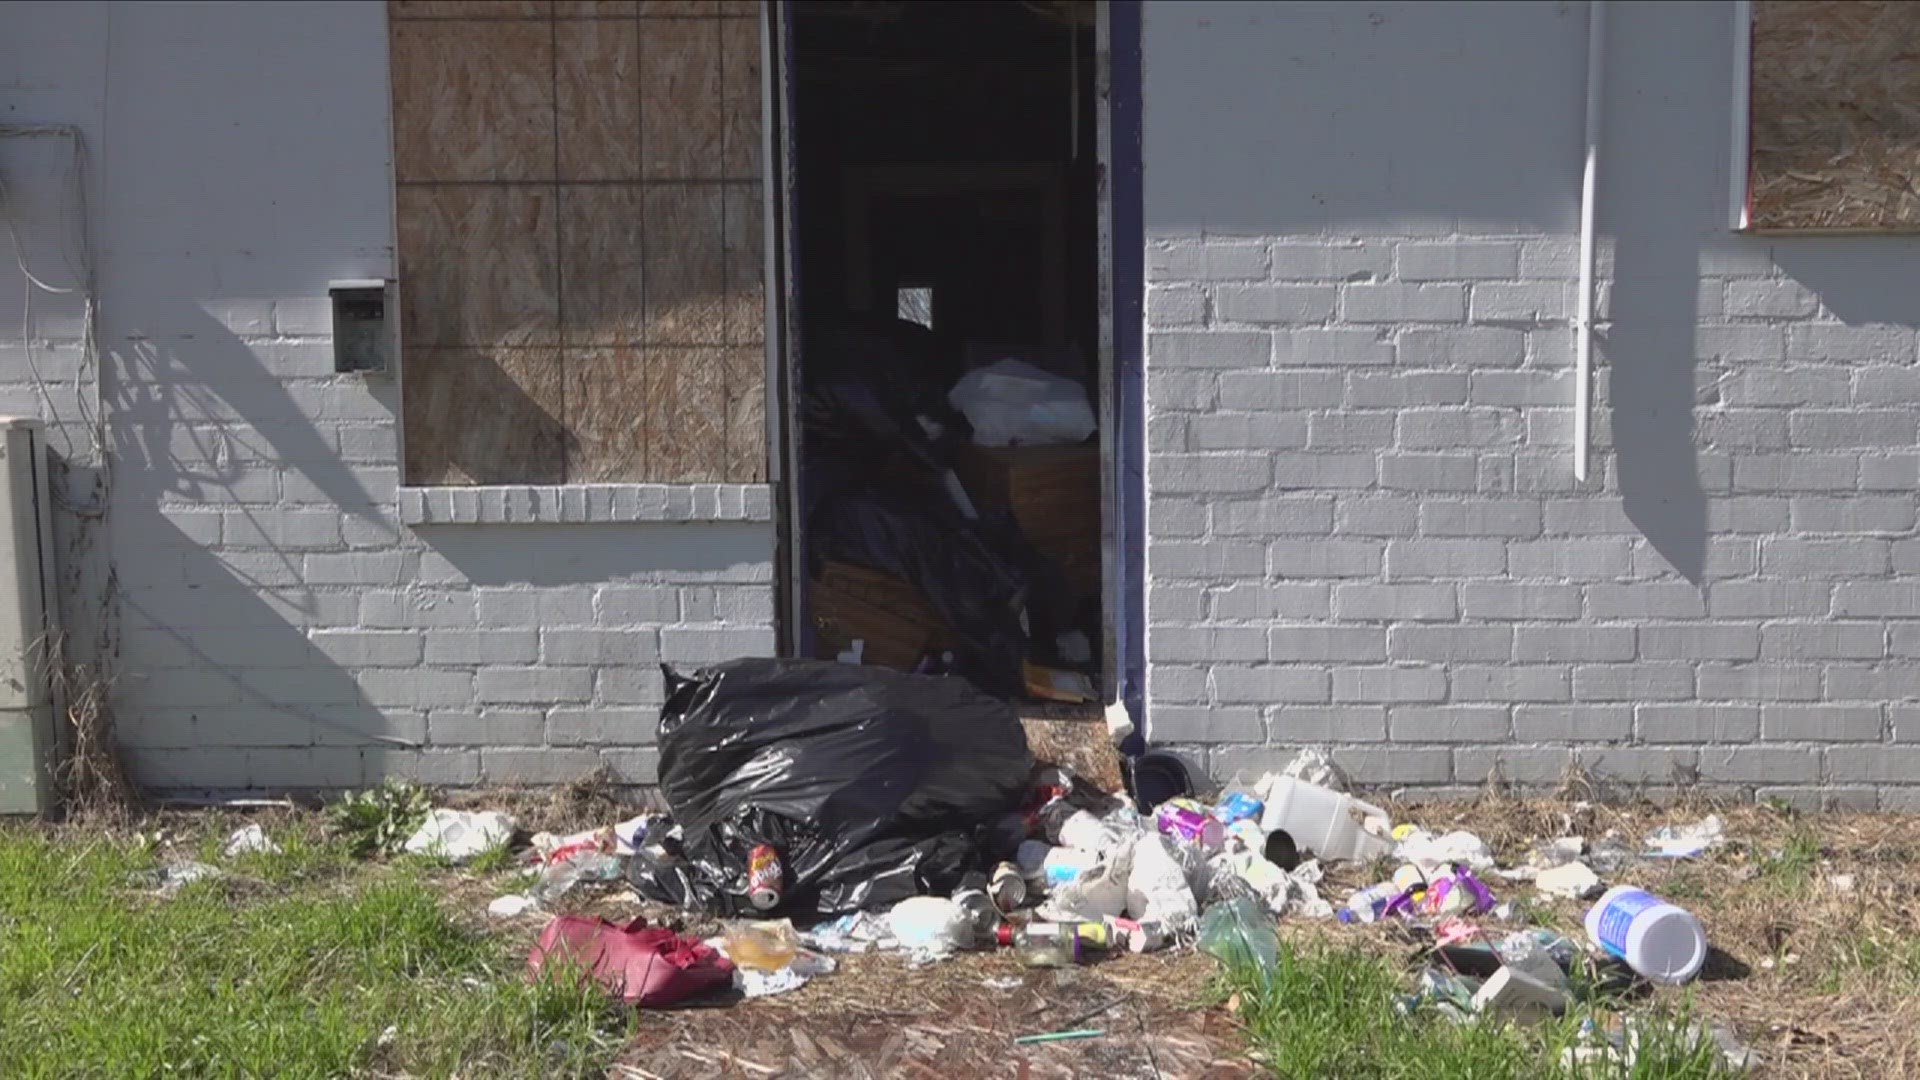 Residents had signs telling them to leave the trash-filled apartment complex, but Code Enforcement denies giving the order.